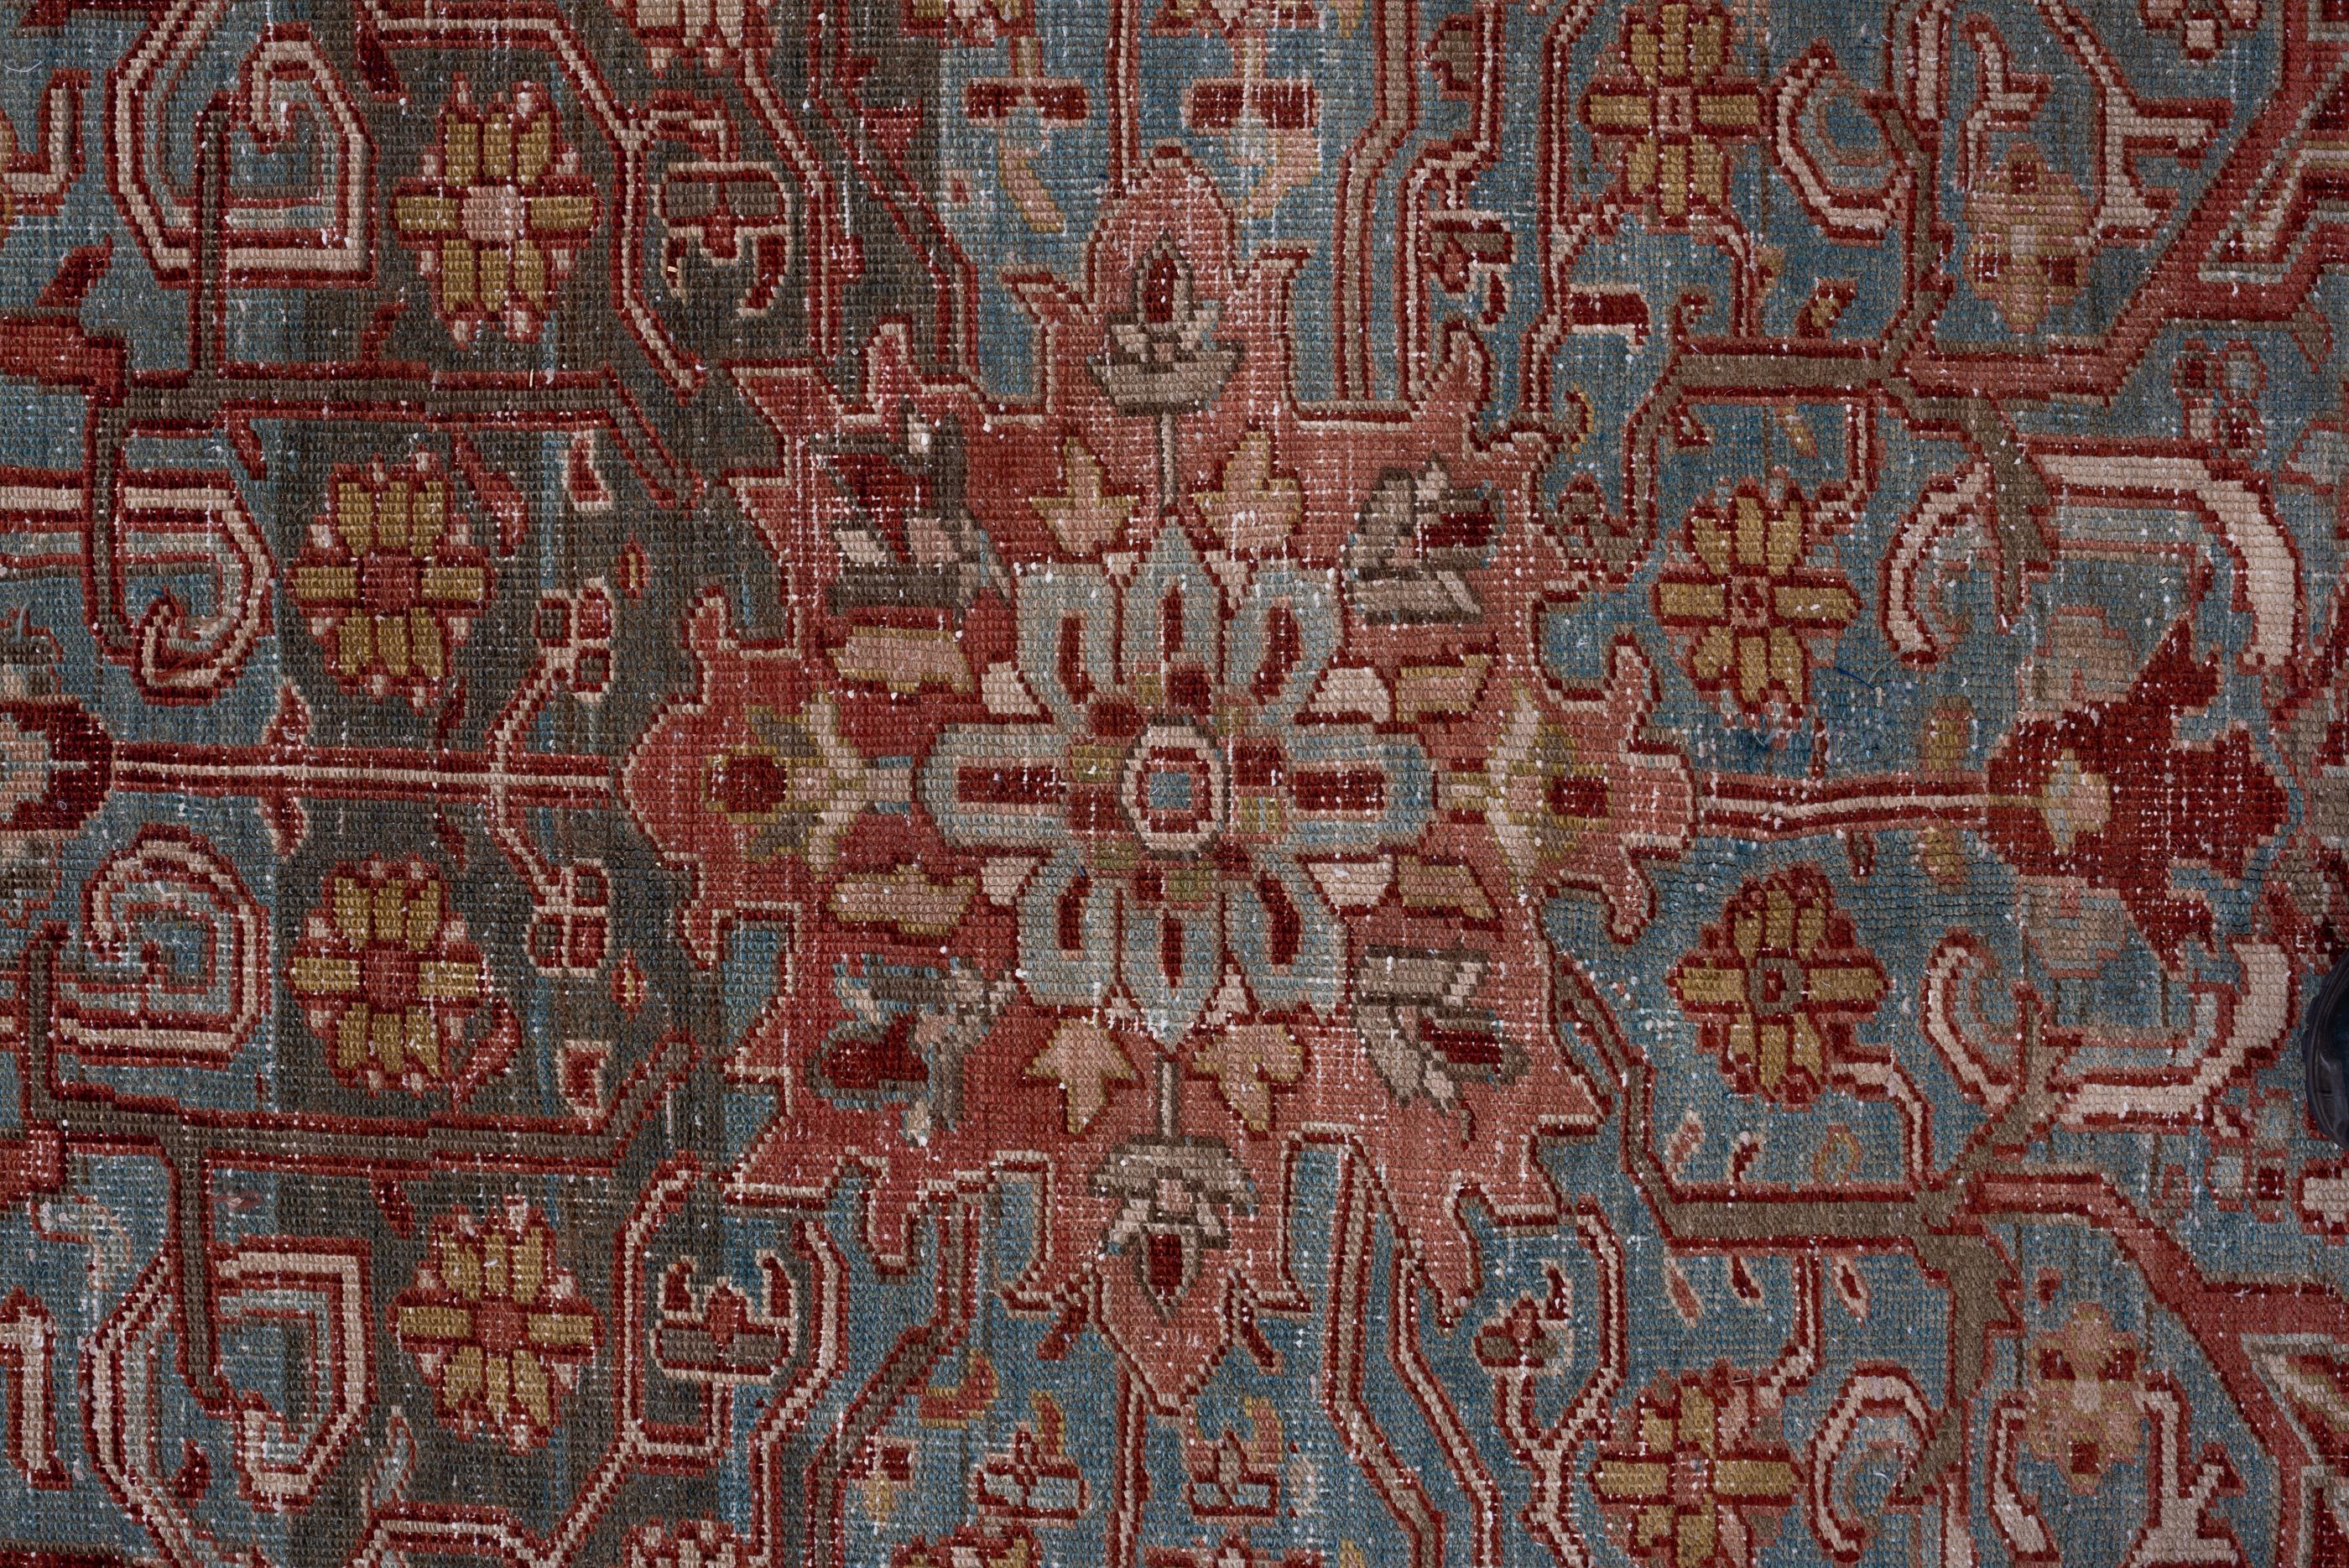 Hand-Knotted Antique Room-Size Heriz Rug with Red Field and Teal Medallion